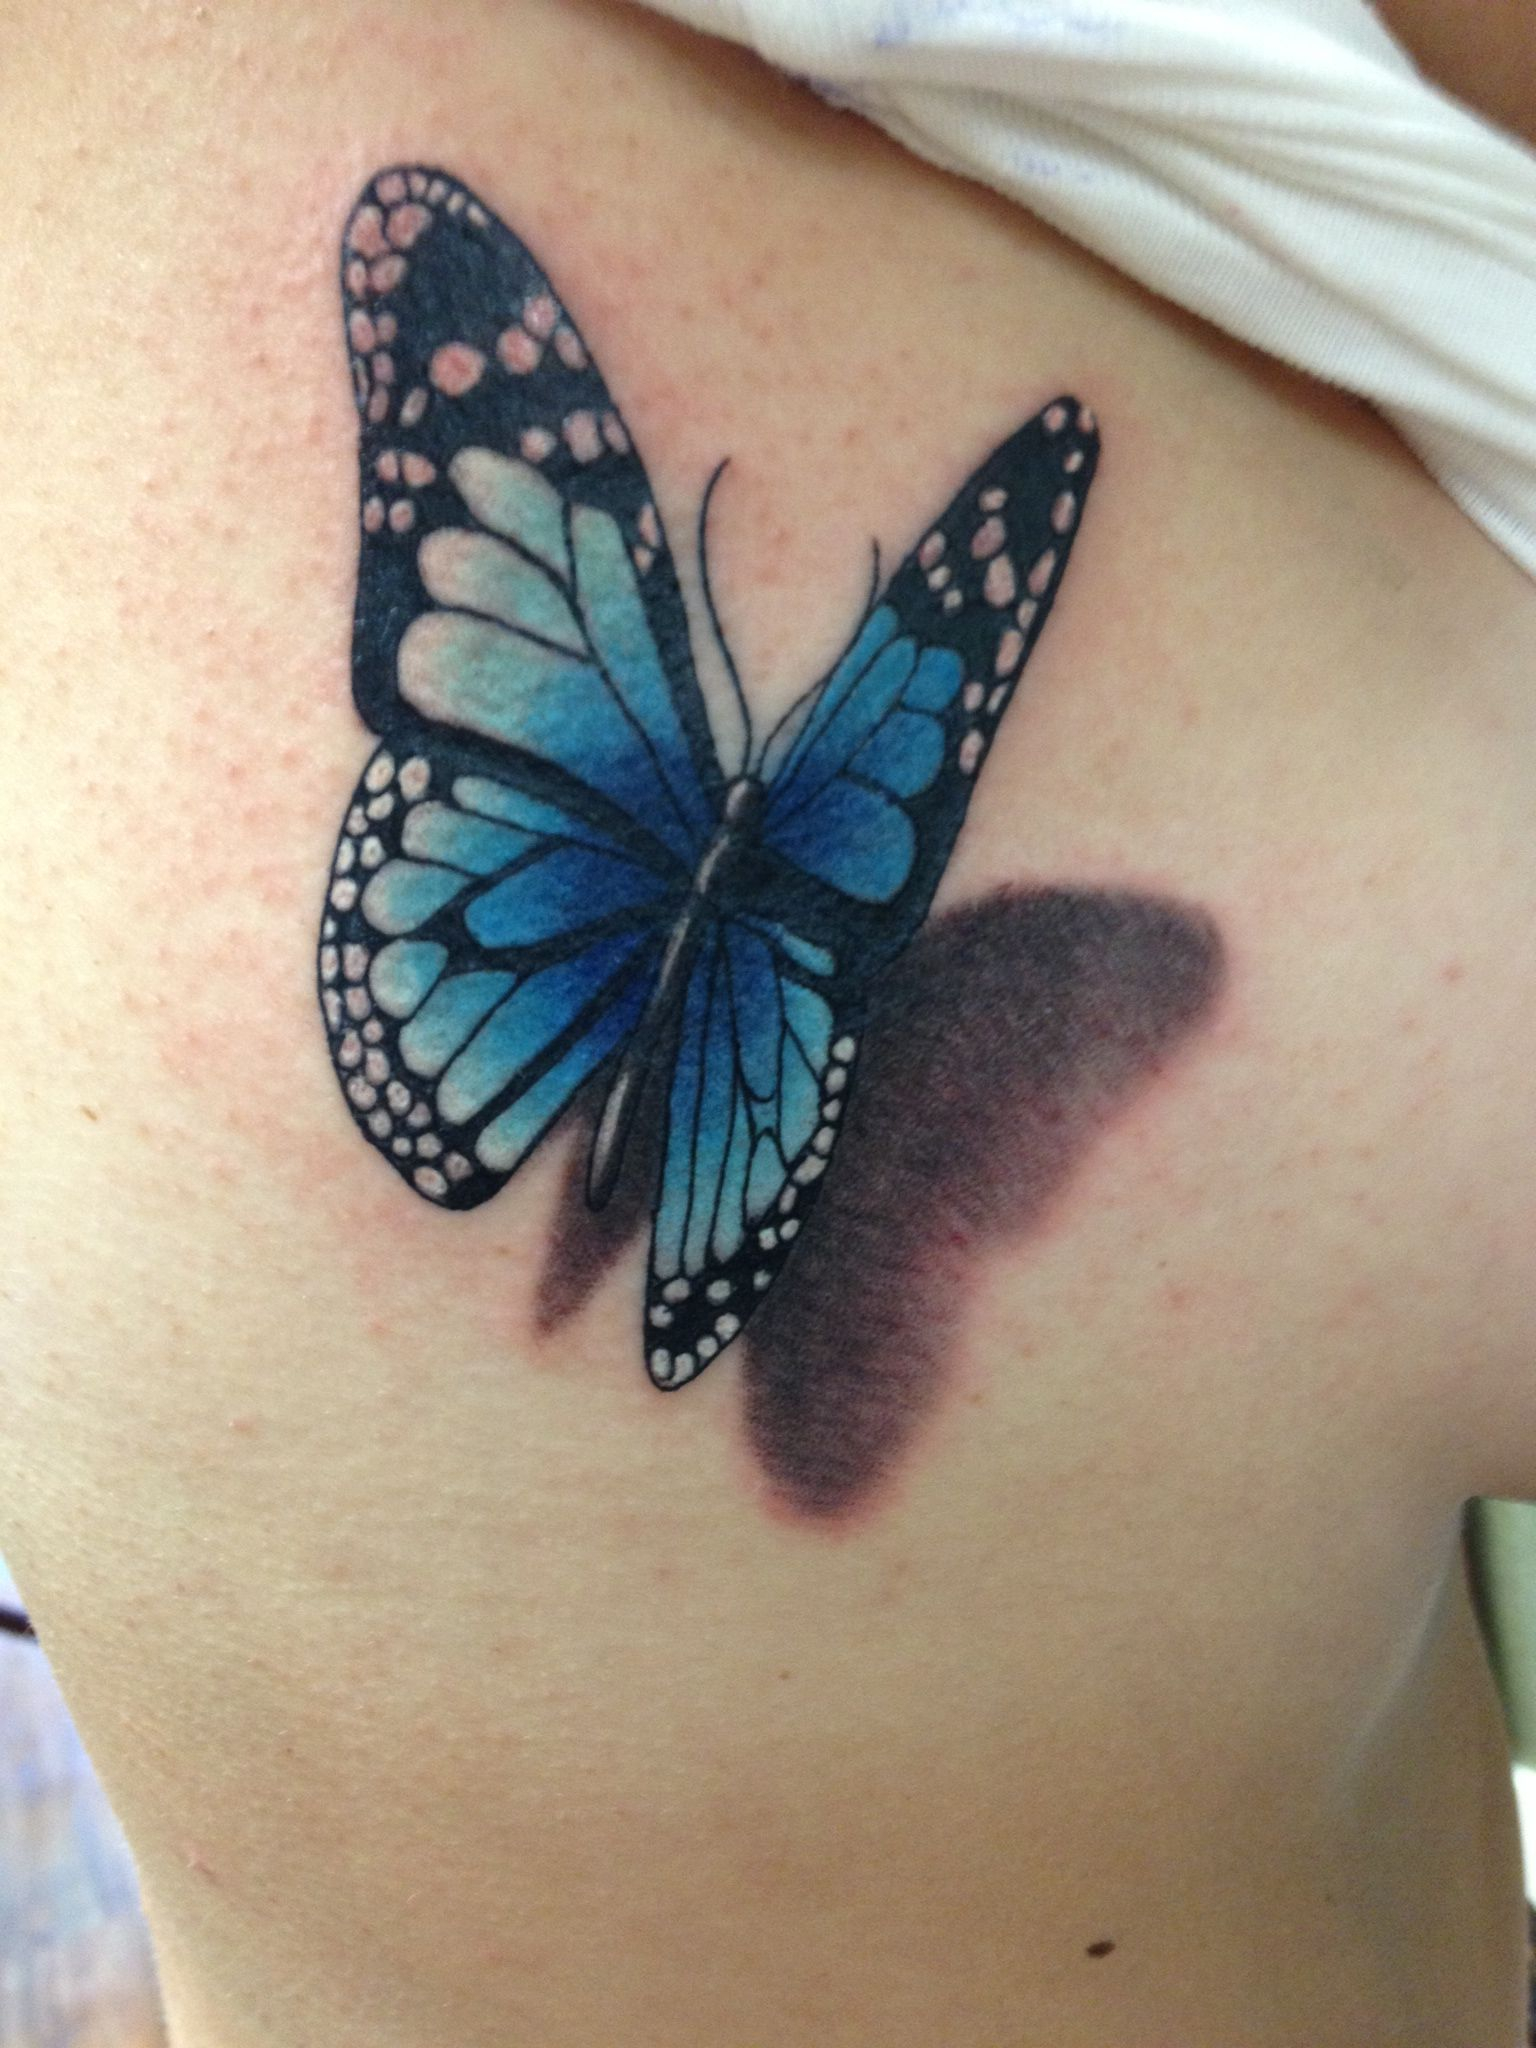 3d Butterfly Tattoo Courtesy Of Chris At Pretty In Ink Roseville Ca pertaining to dimensions 1536 X 2048